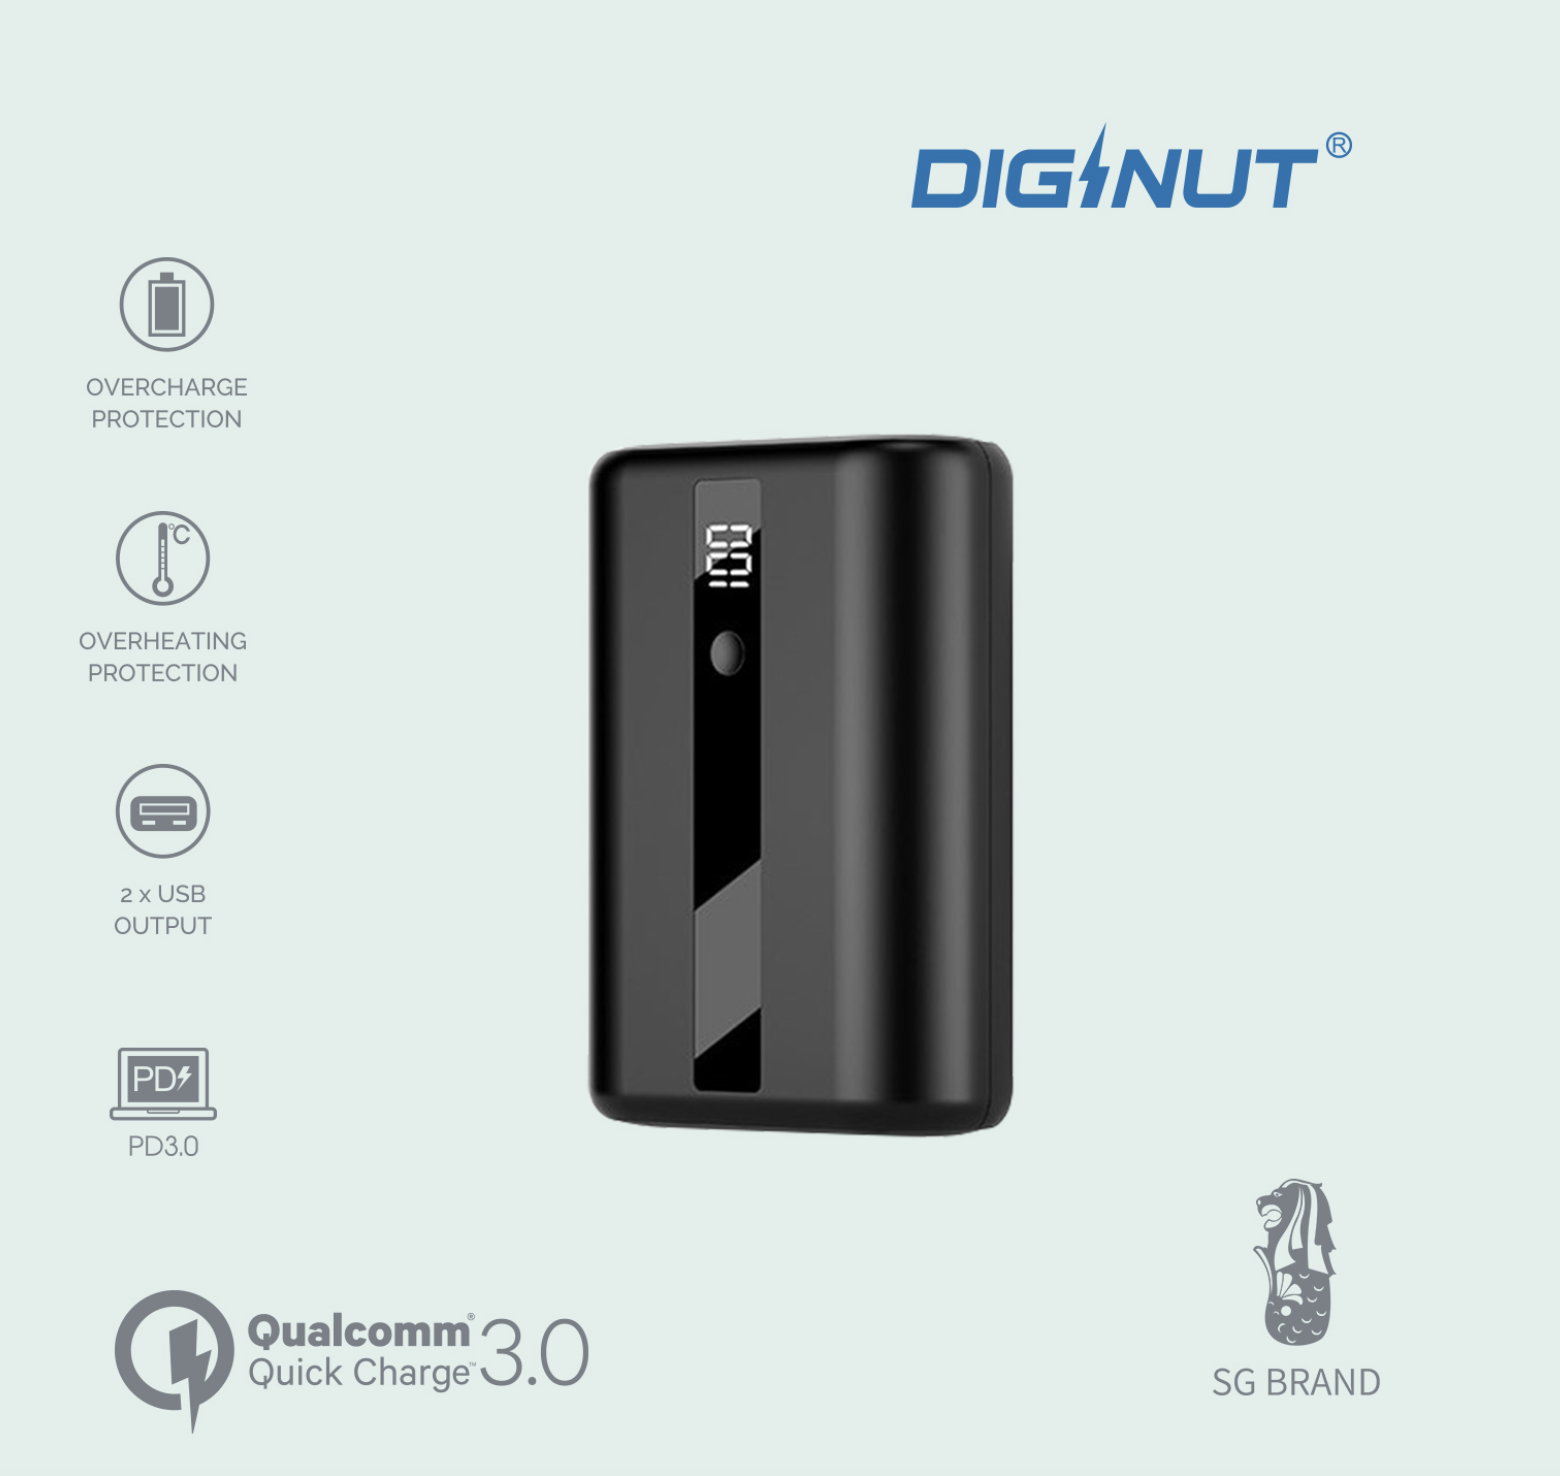 Diginut - P36 10000mAh PD+QC 18W Compact Power bank/PD 18W and QC 3.0 Fast Charging